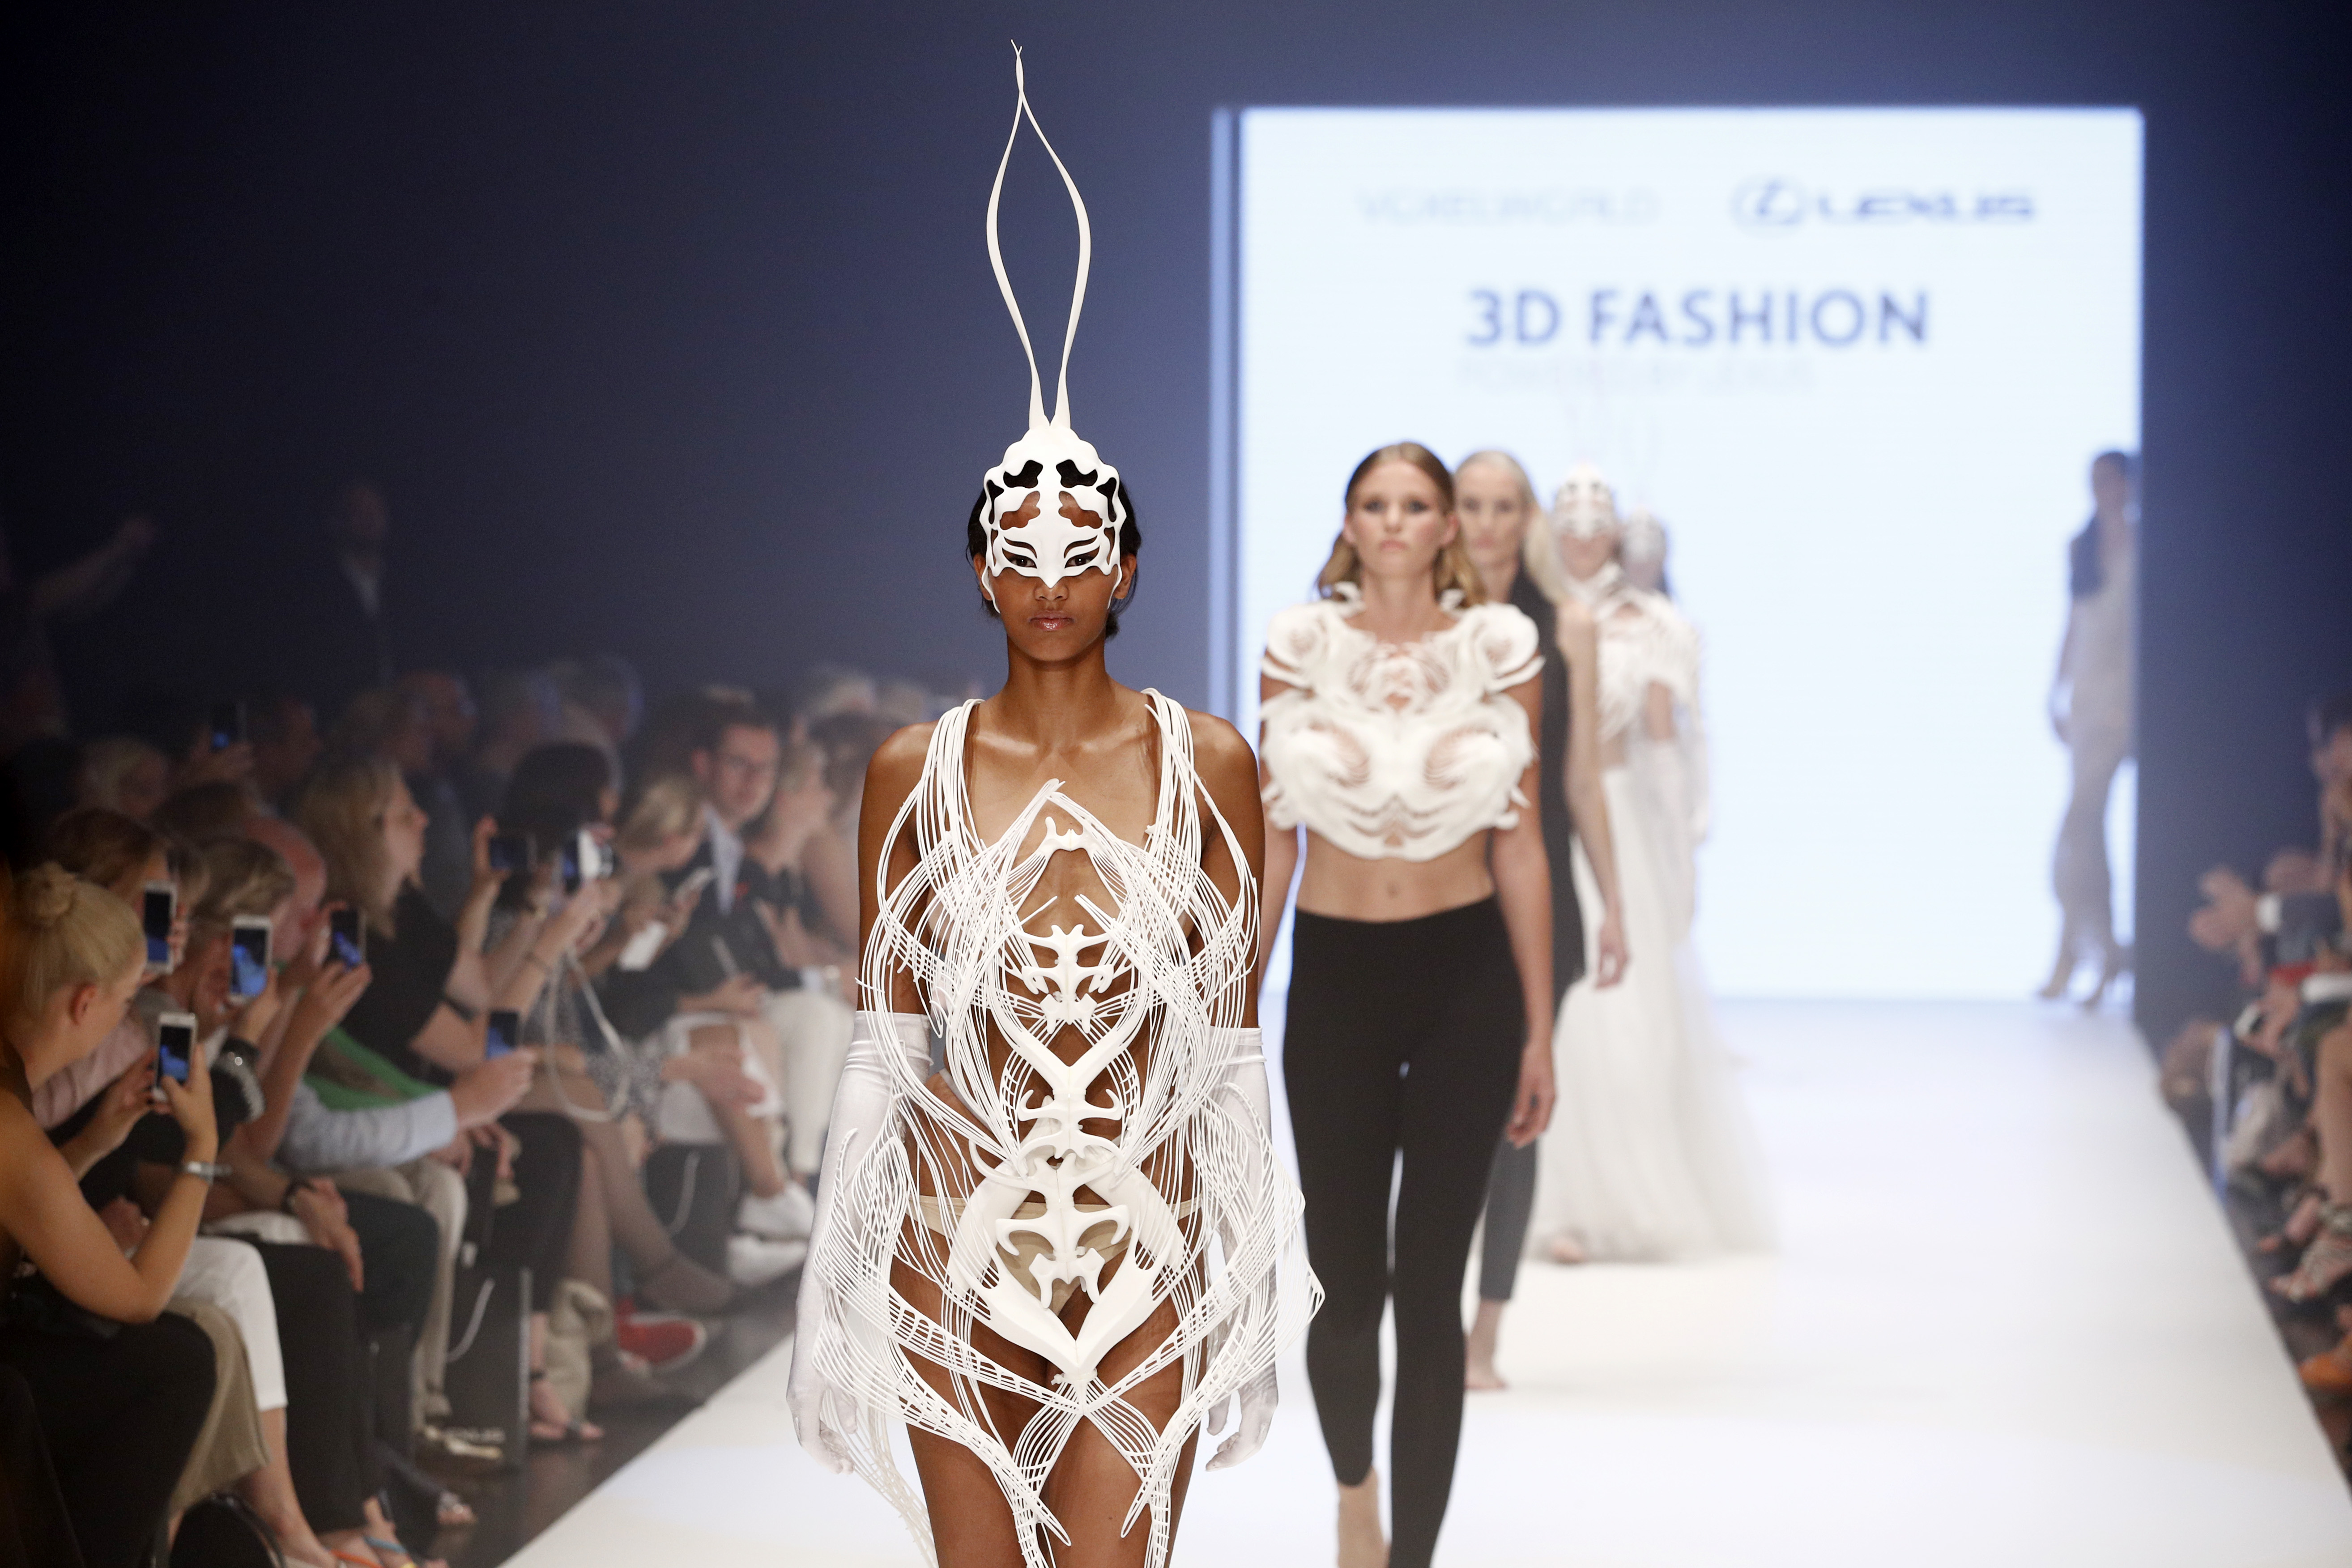 Lexus and VOXELWORLD Present 3D Fashion Show in Germany